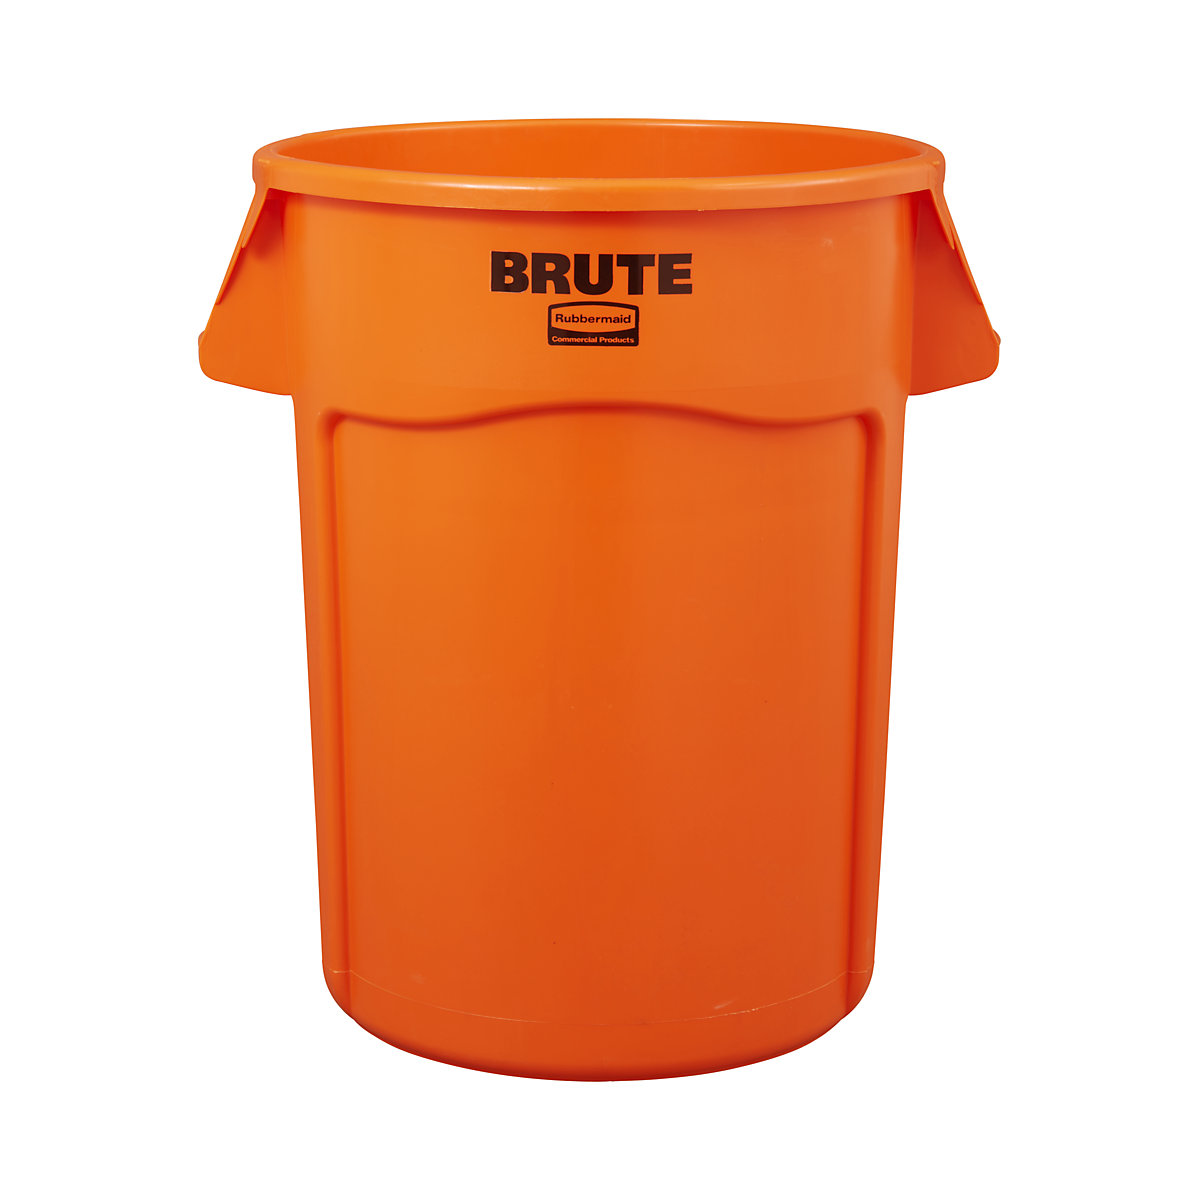 BRUTE® universal container, round - Rubbermaid